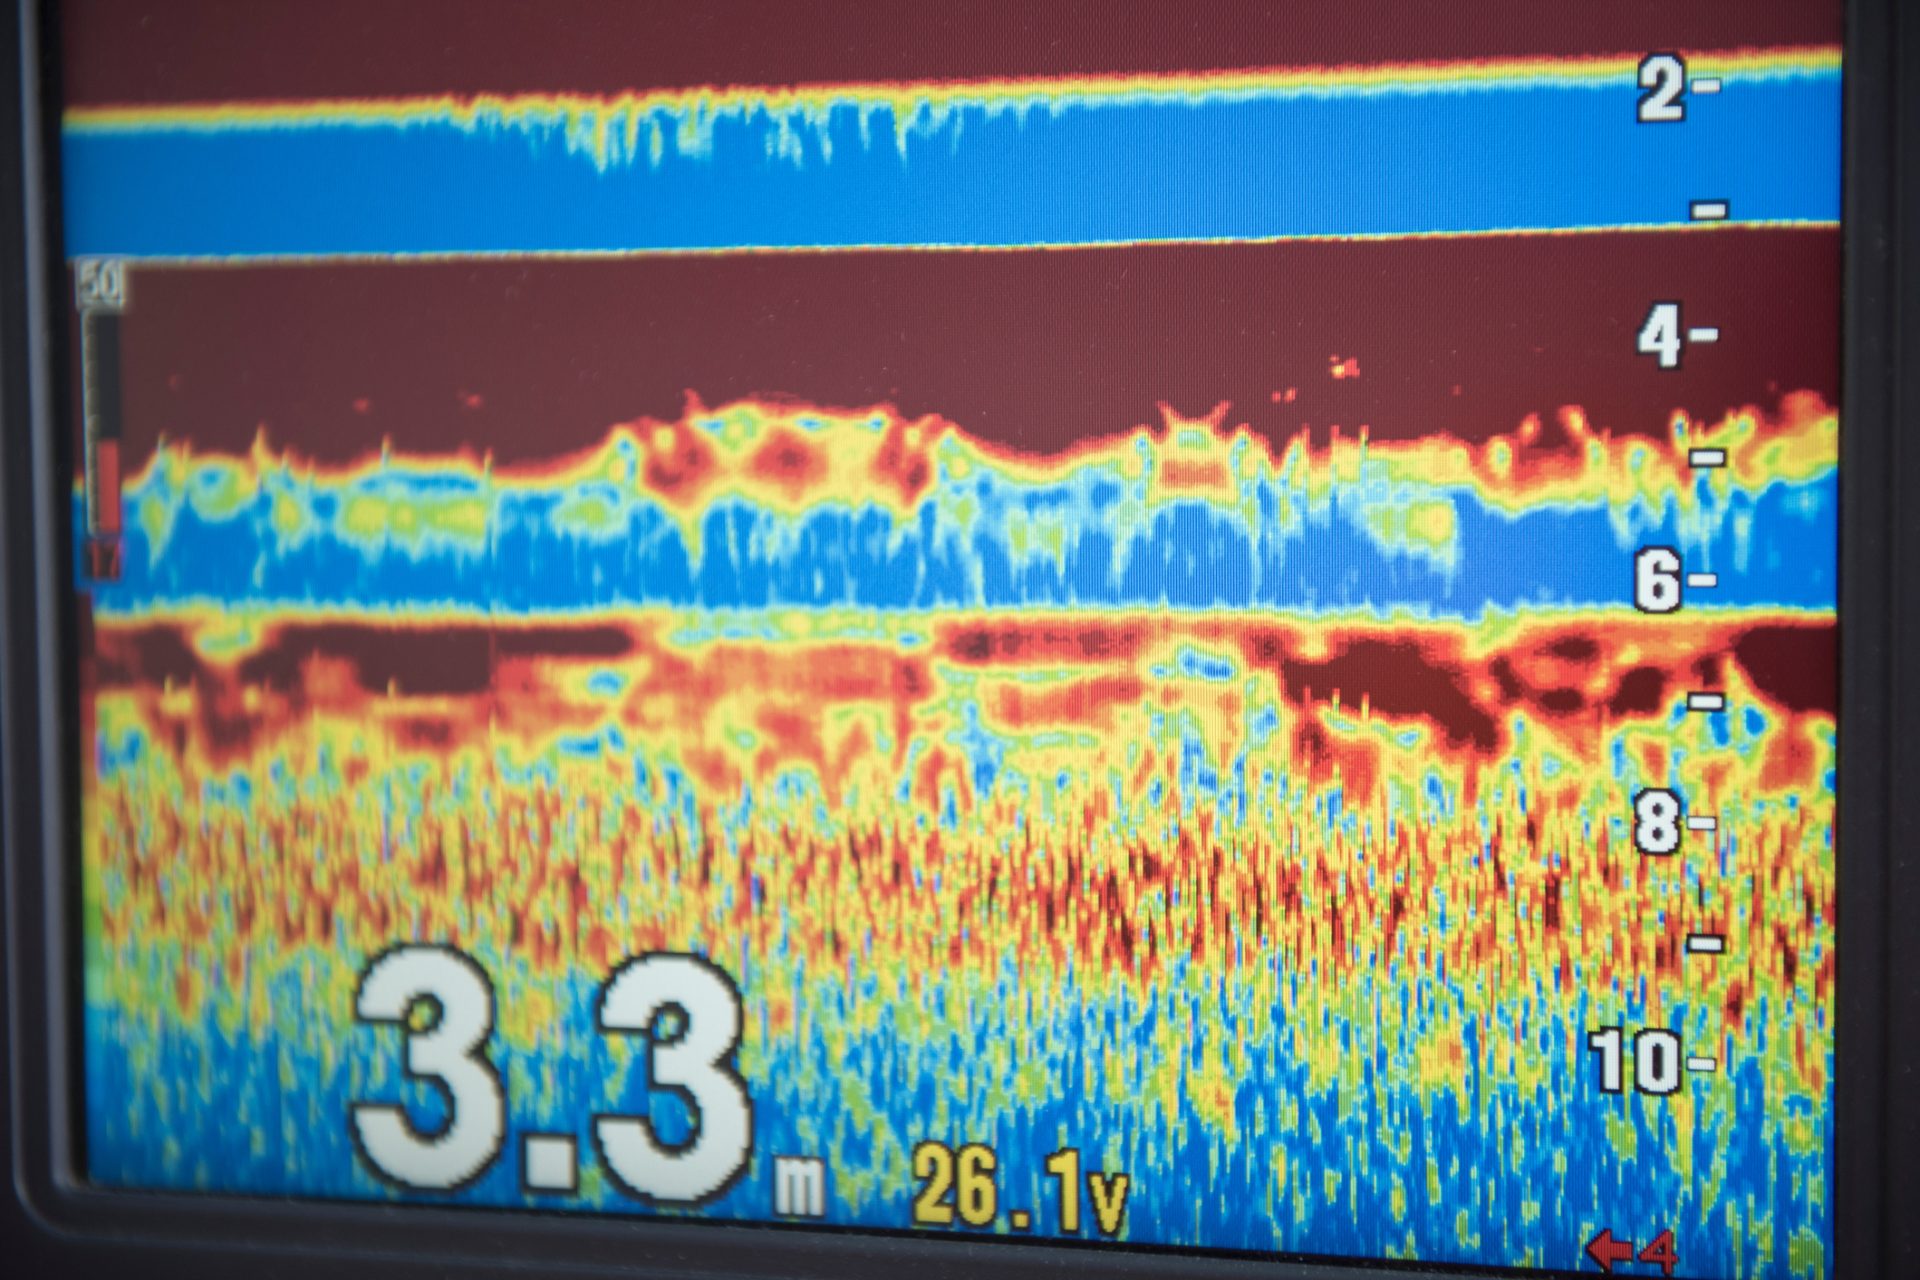 How does sonar work?